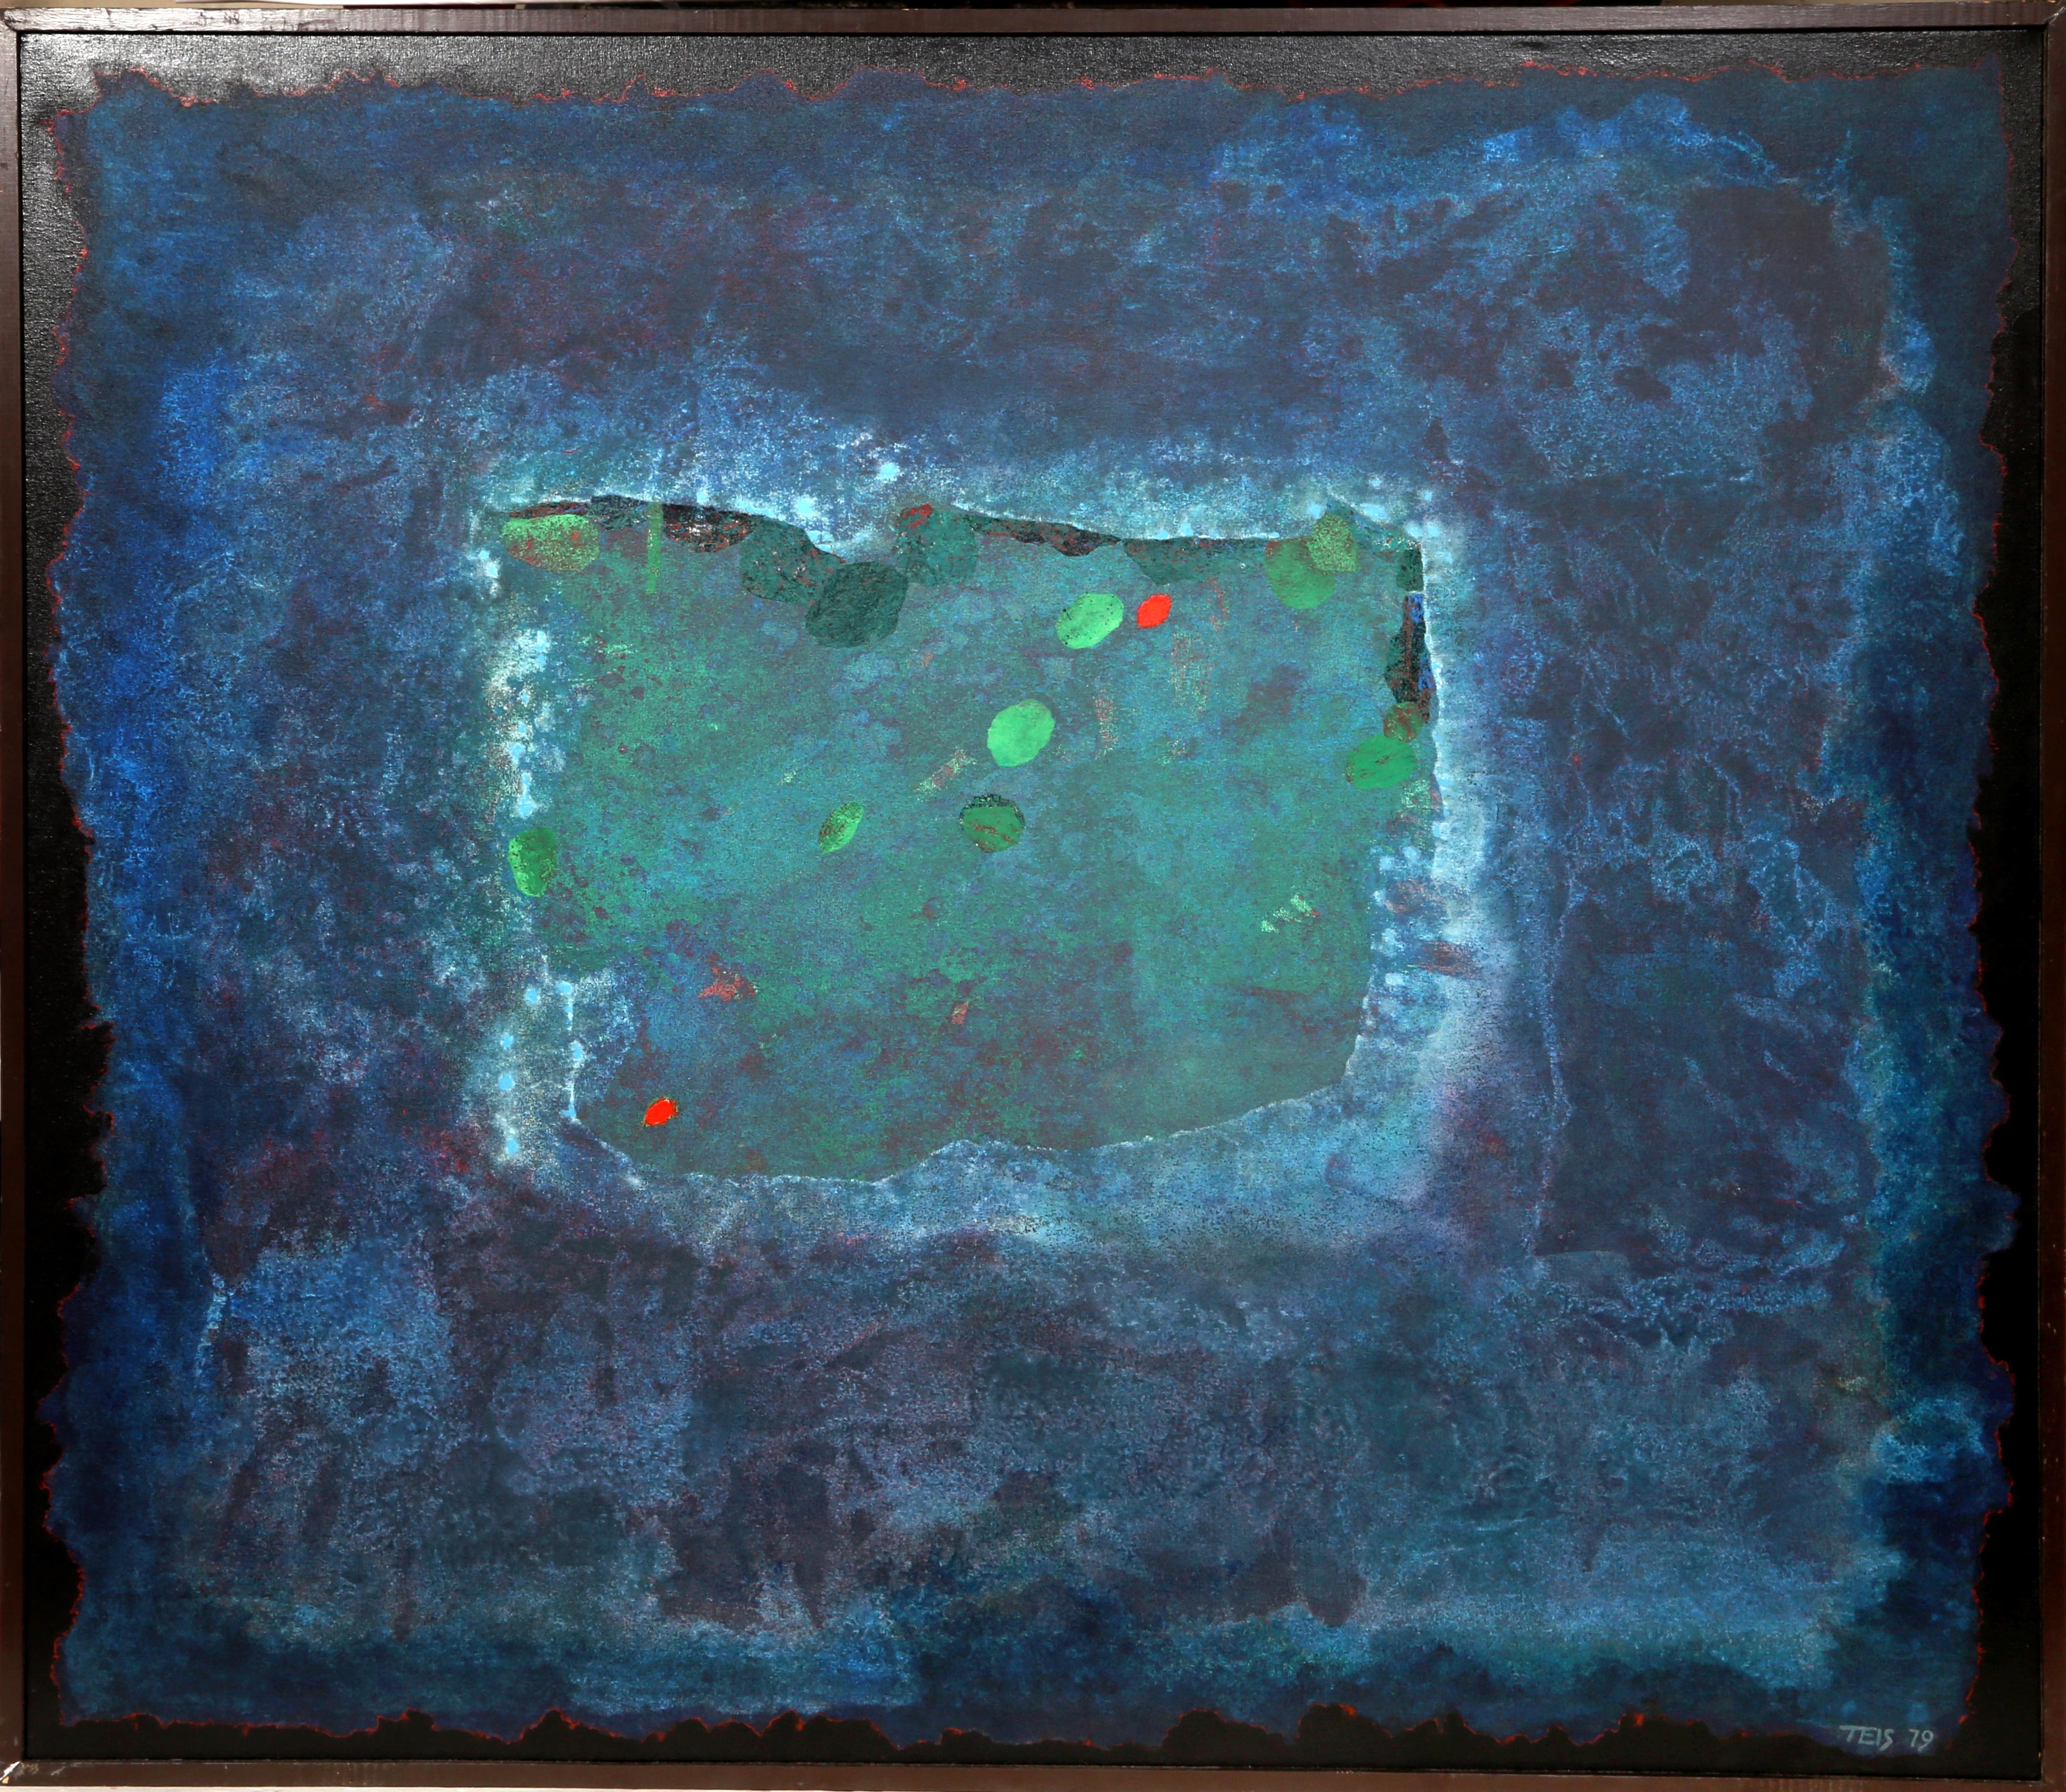 Artist: Dan Teis, American (1925 - 2002)
Title: Abstract Lake with Lily Pads
Year: 1979
Medium: Acrylic on Canvas, signed l.r.
Size: 54 x 60 in. (137.16 x 152.4 cm)
Frame Size: 55 x 61.5 inches